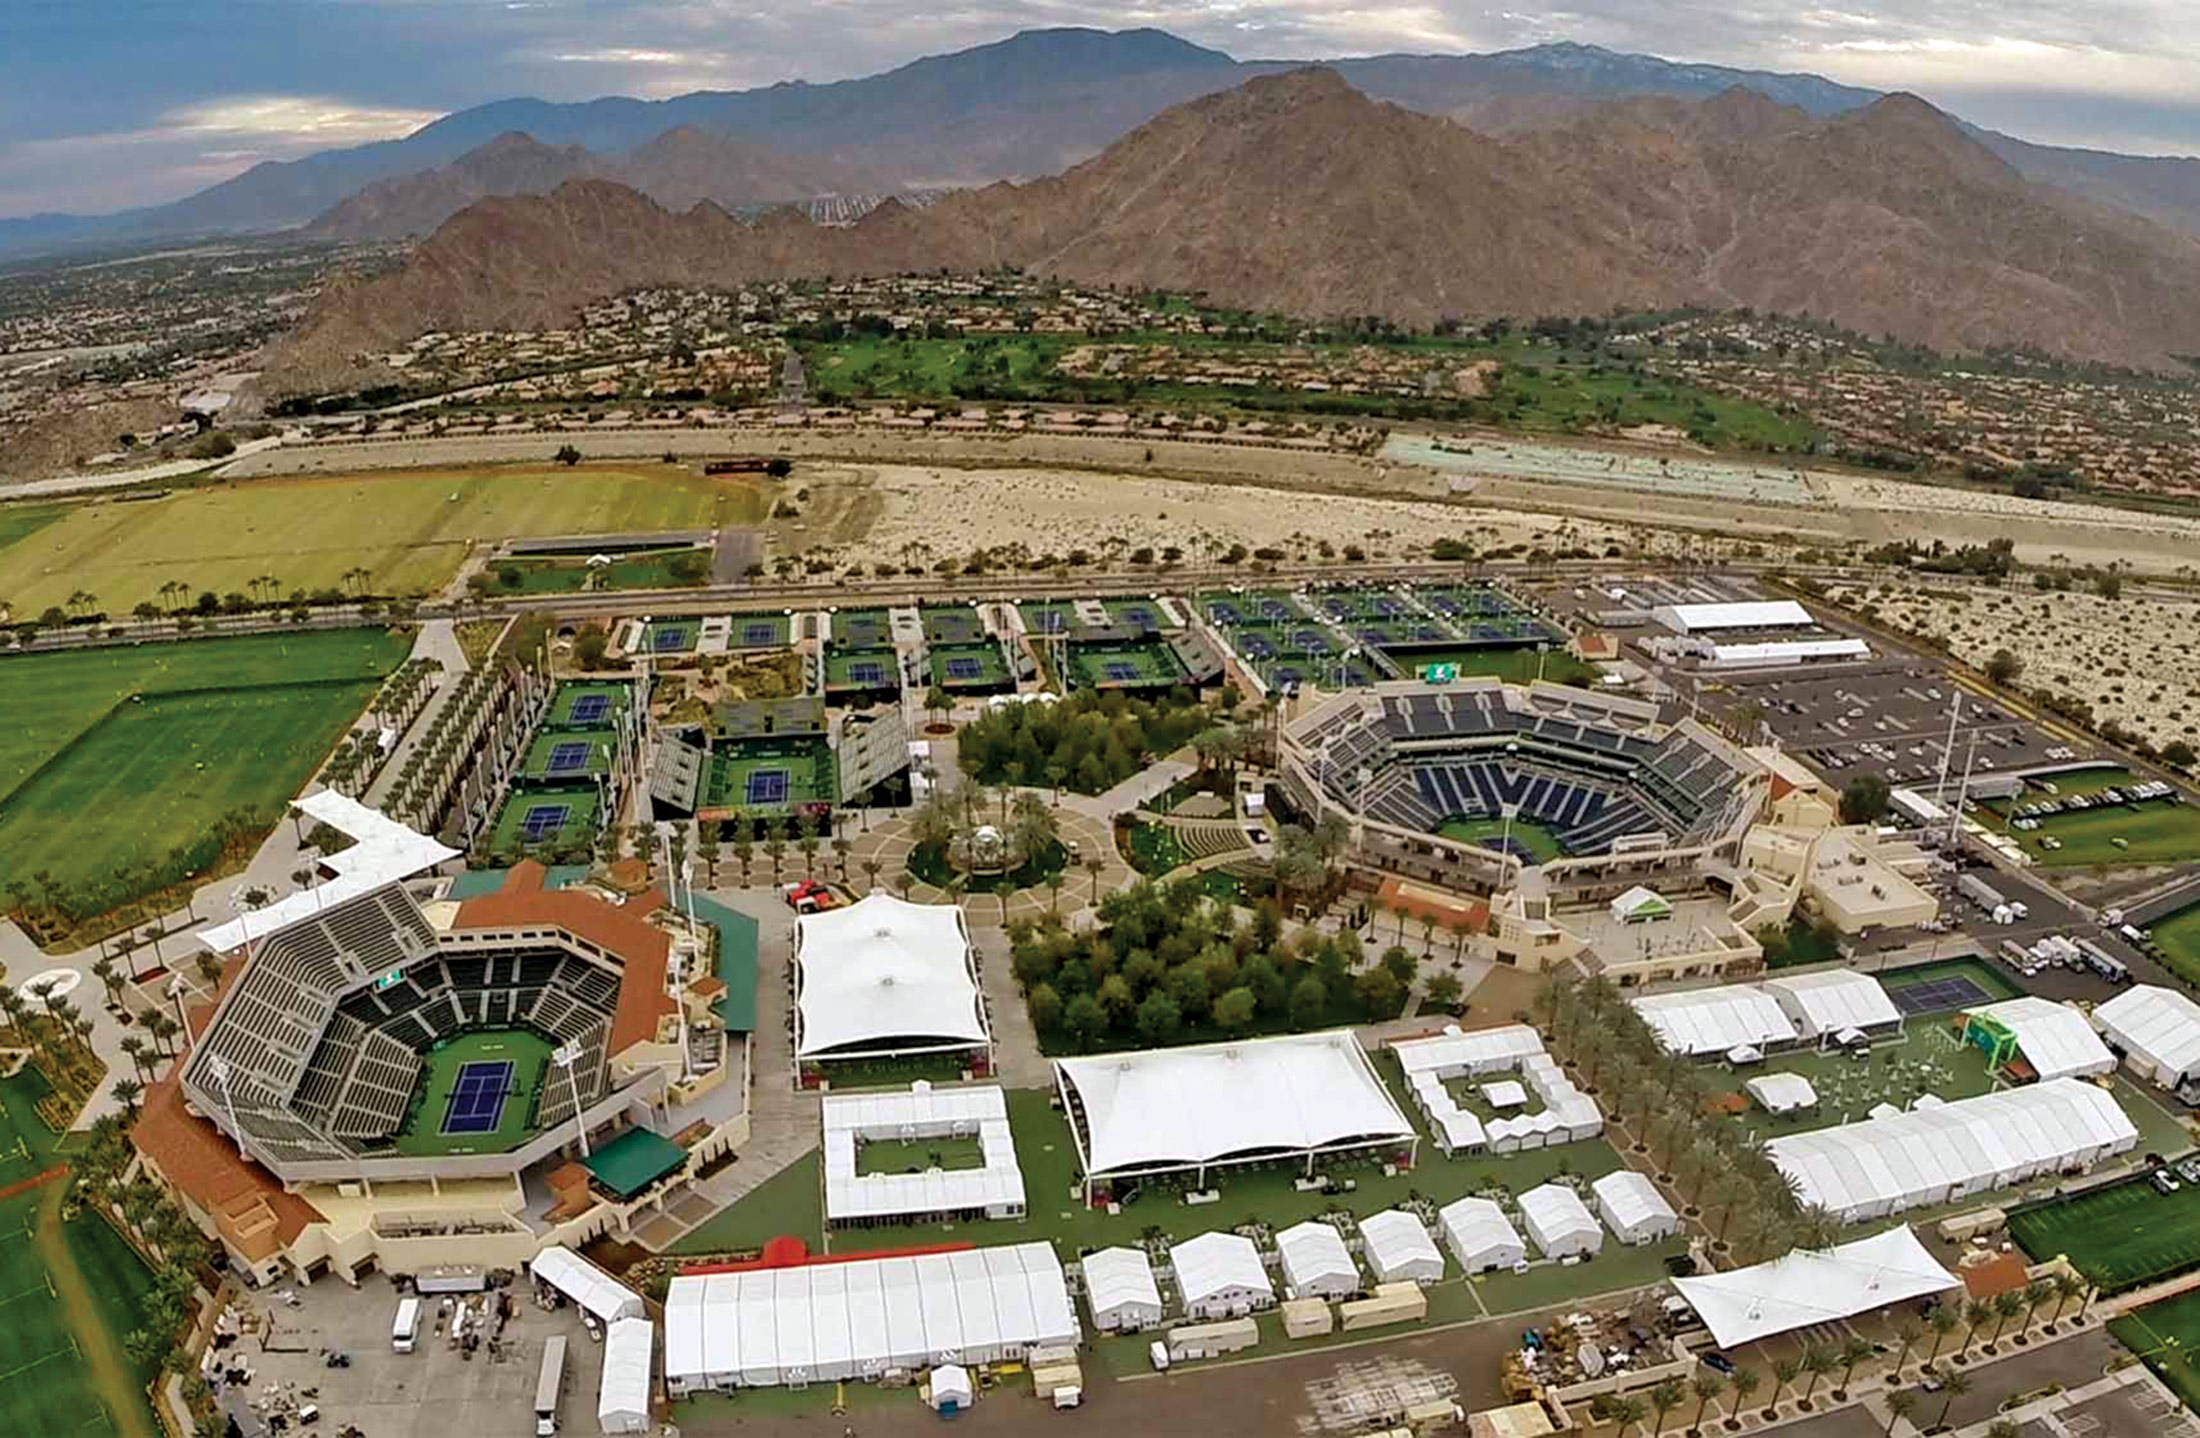 The Indian Wells Tennis Garden hosted 456,000 fans this year.